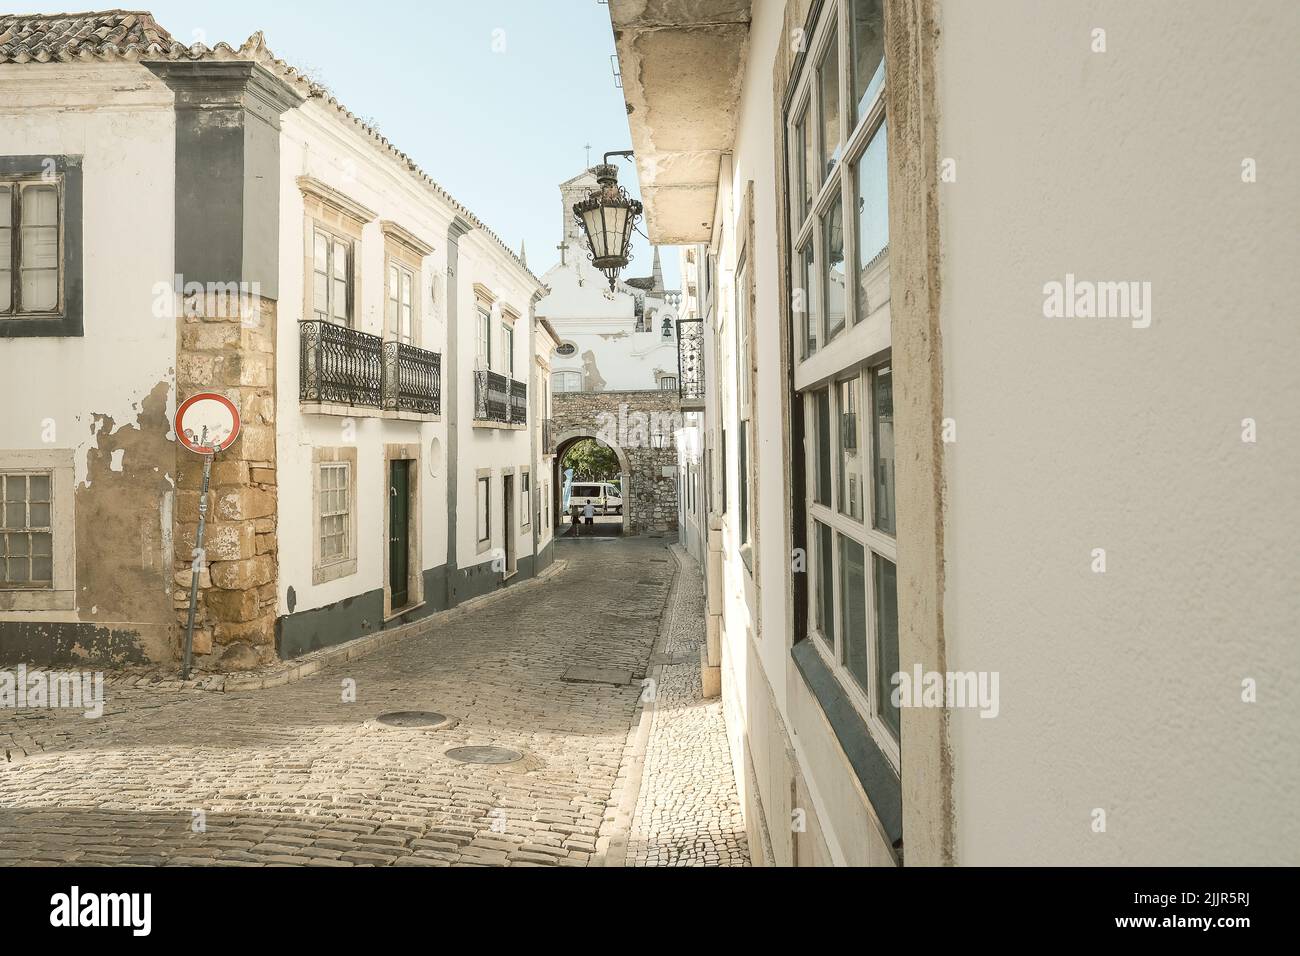 A vertical shot of a old cobblestone street with old buildings in Portugal Stock Photo